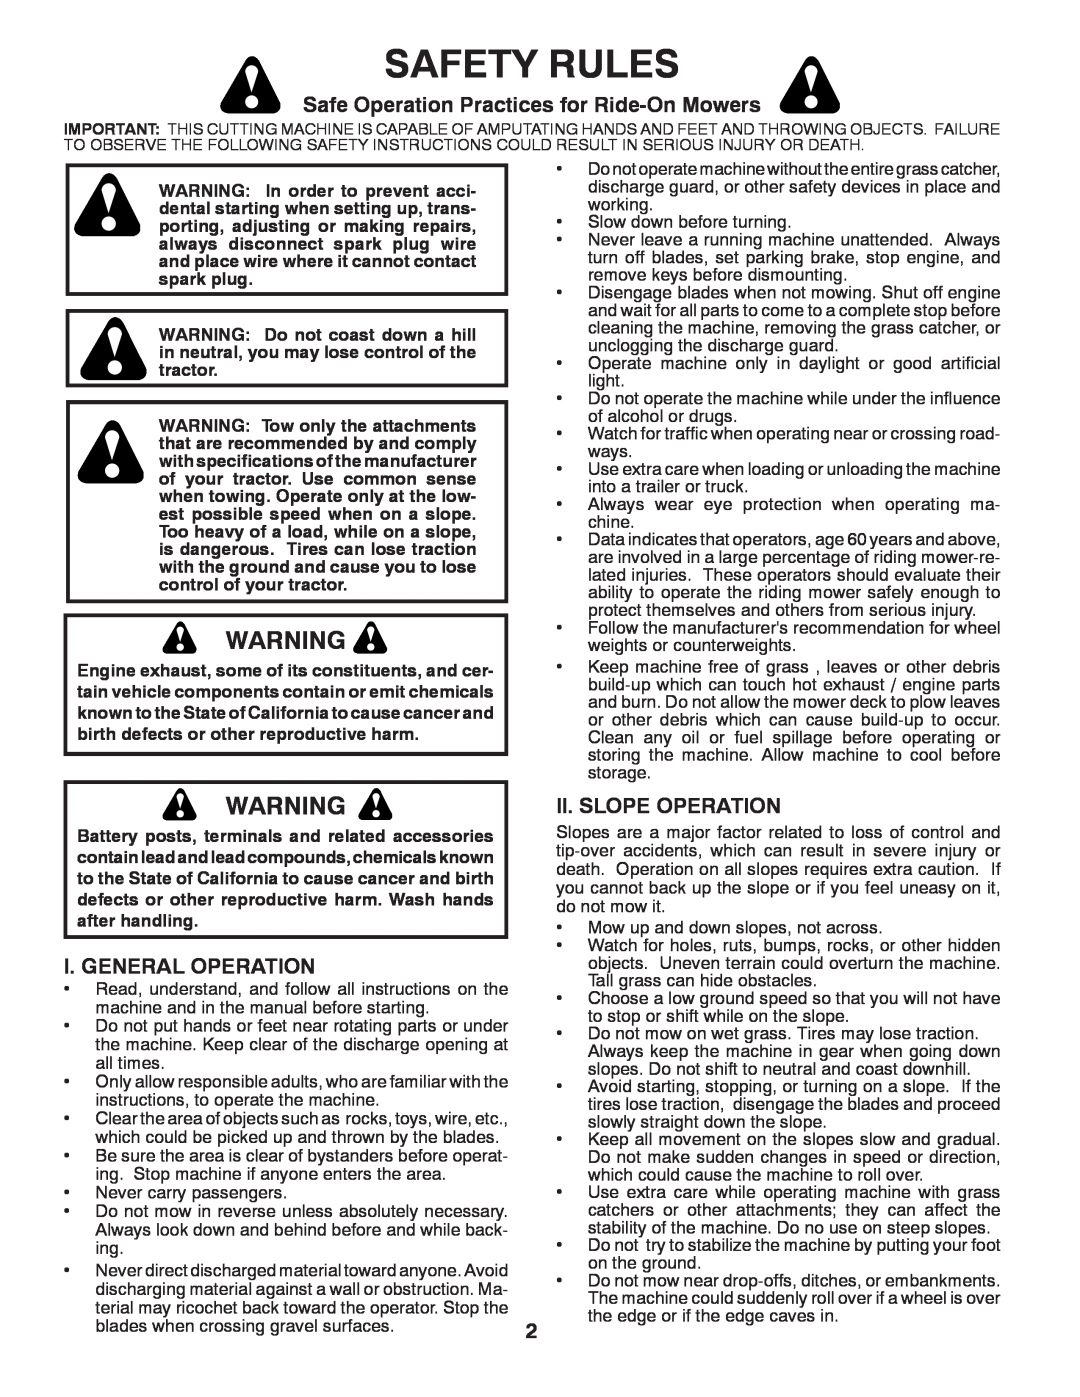 Poulan 96012008300 Safety Rules, Safe Operation Practices for Ride-On Mowers, I. General Operation, Ii. Slope Operation 